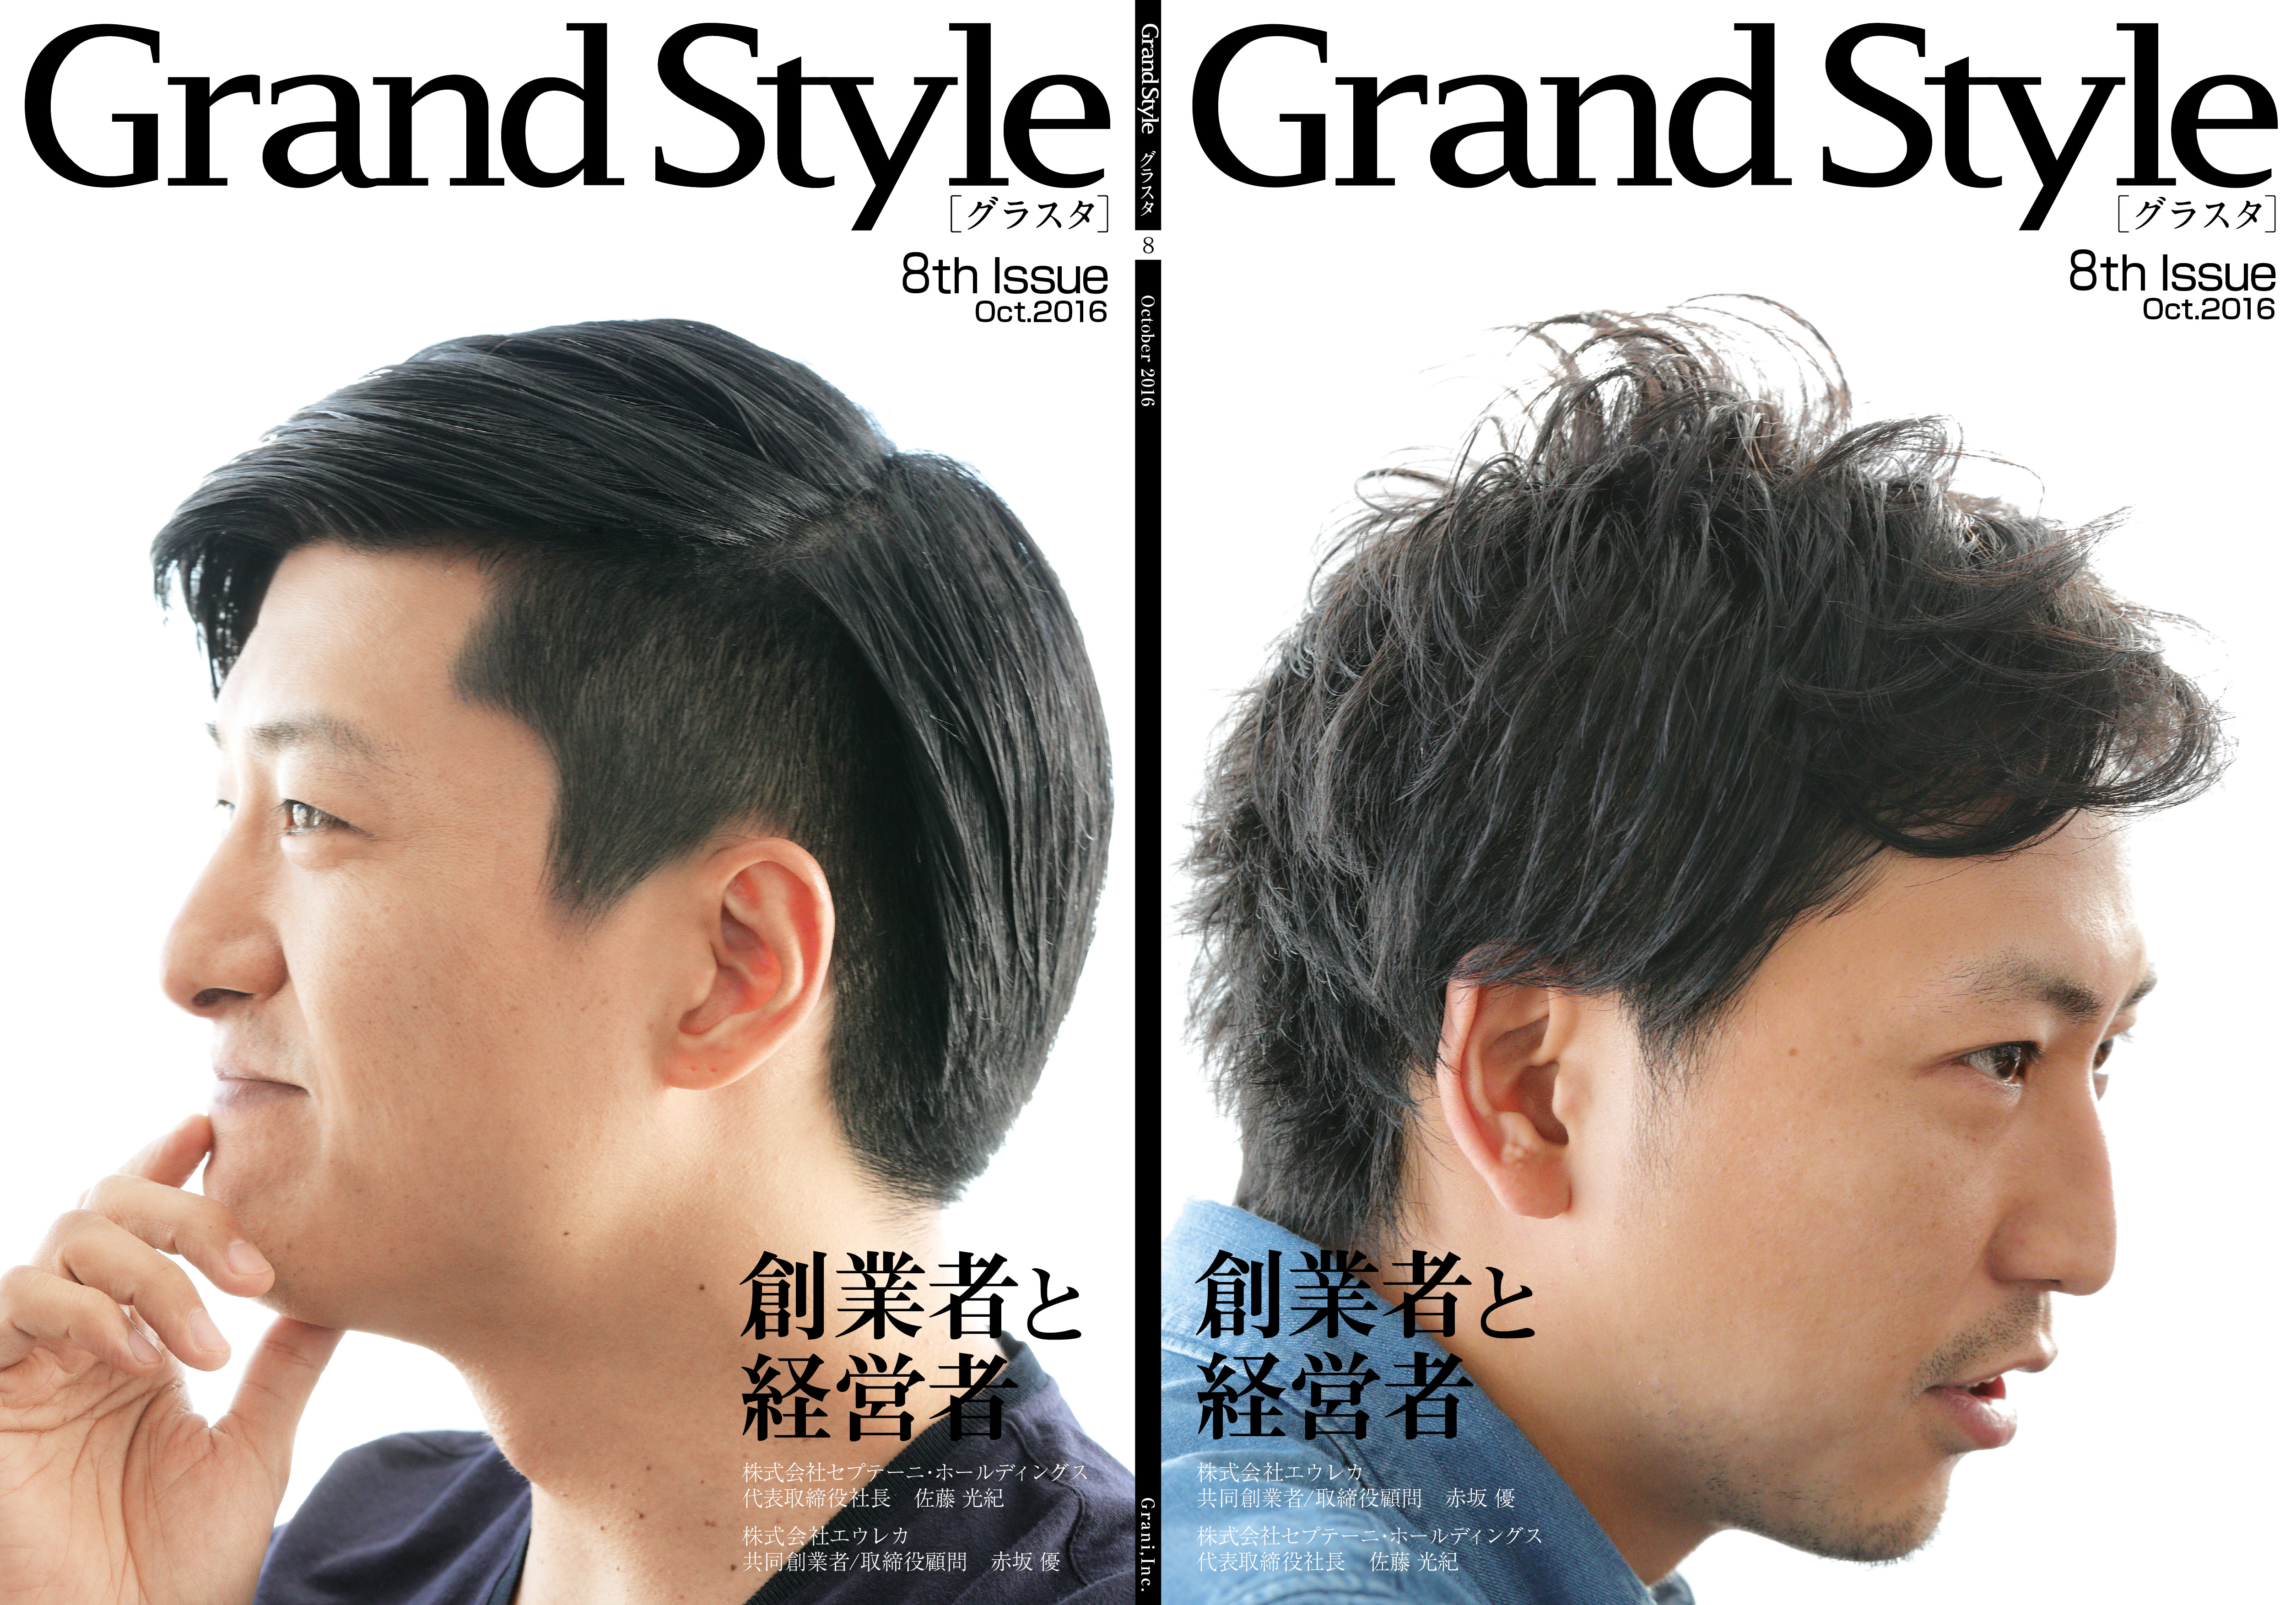 『Grand Style』8th Issue